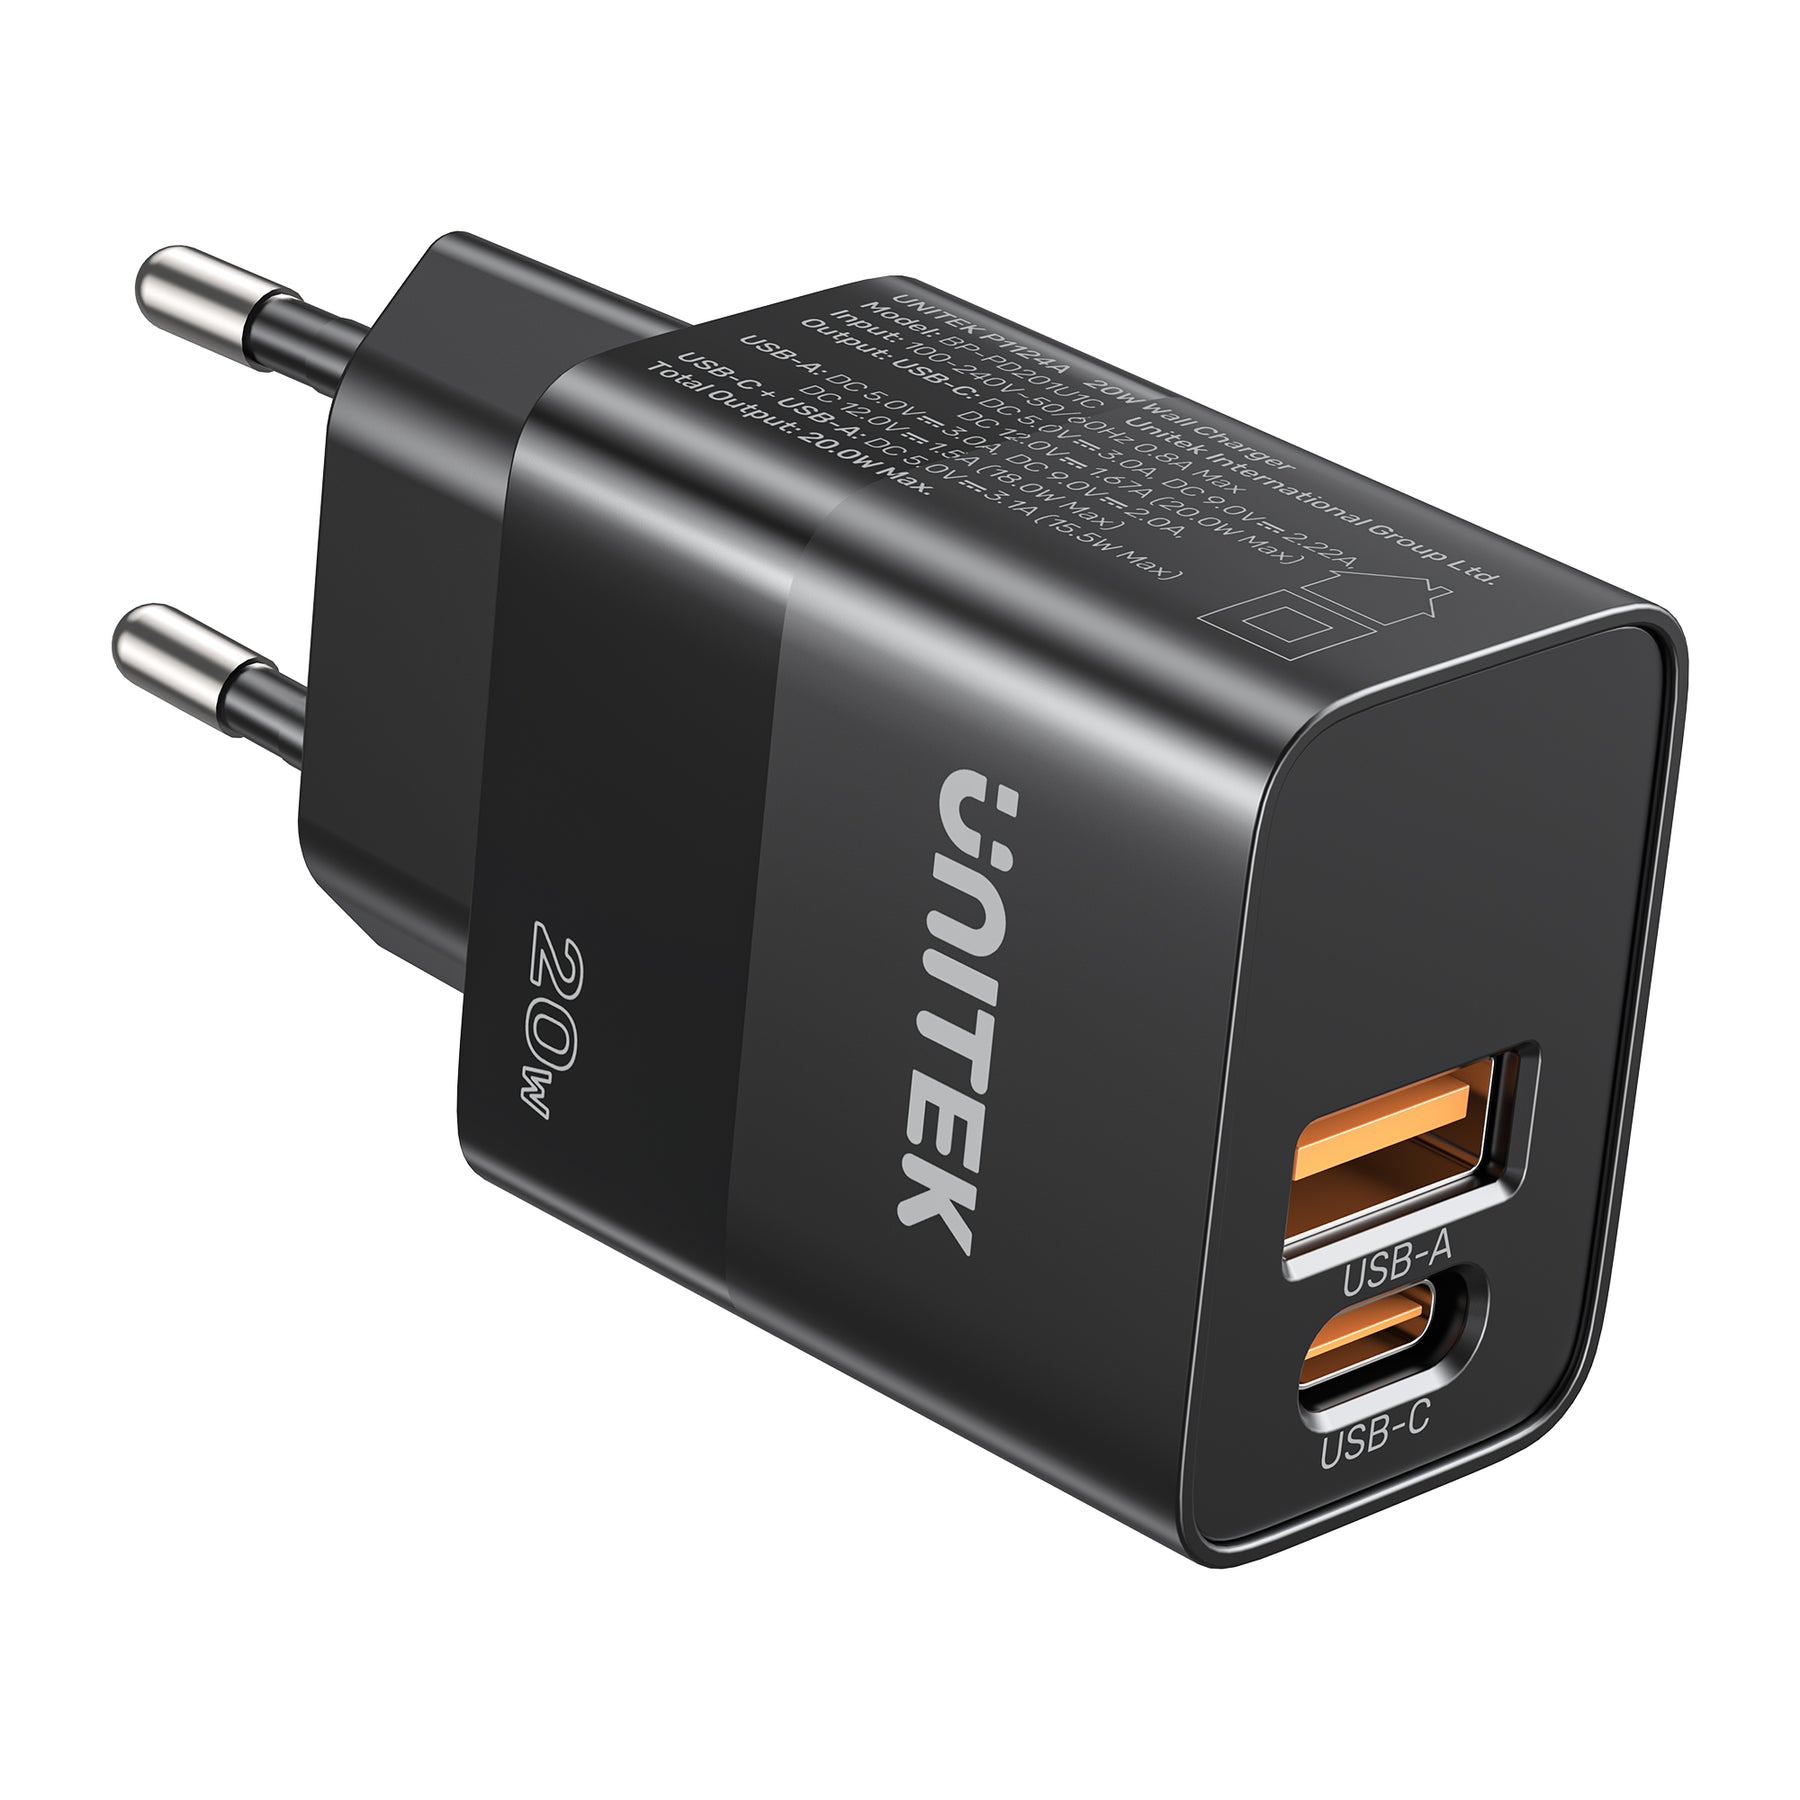 20W Wall Charger (Dual Port QC + PD 3.0 Power Adapter)